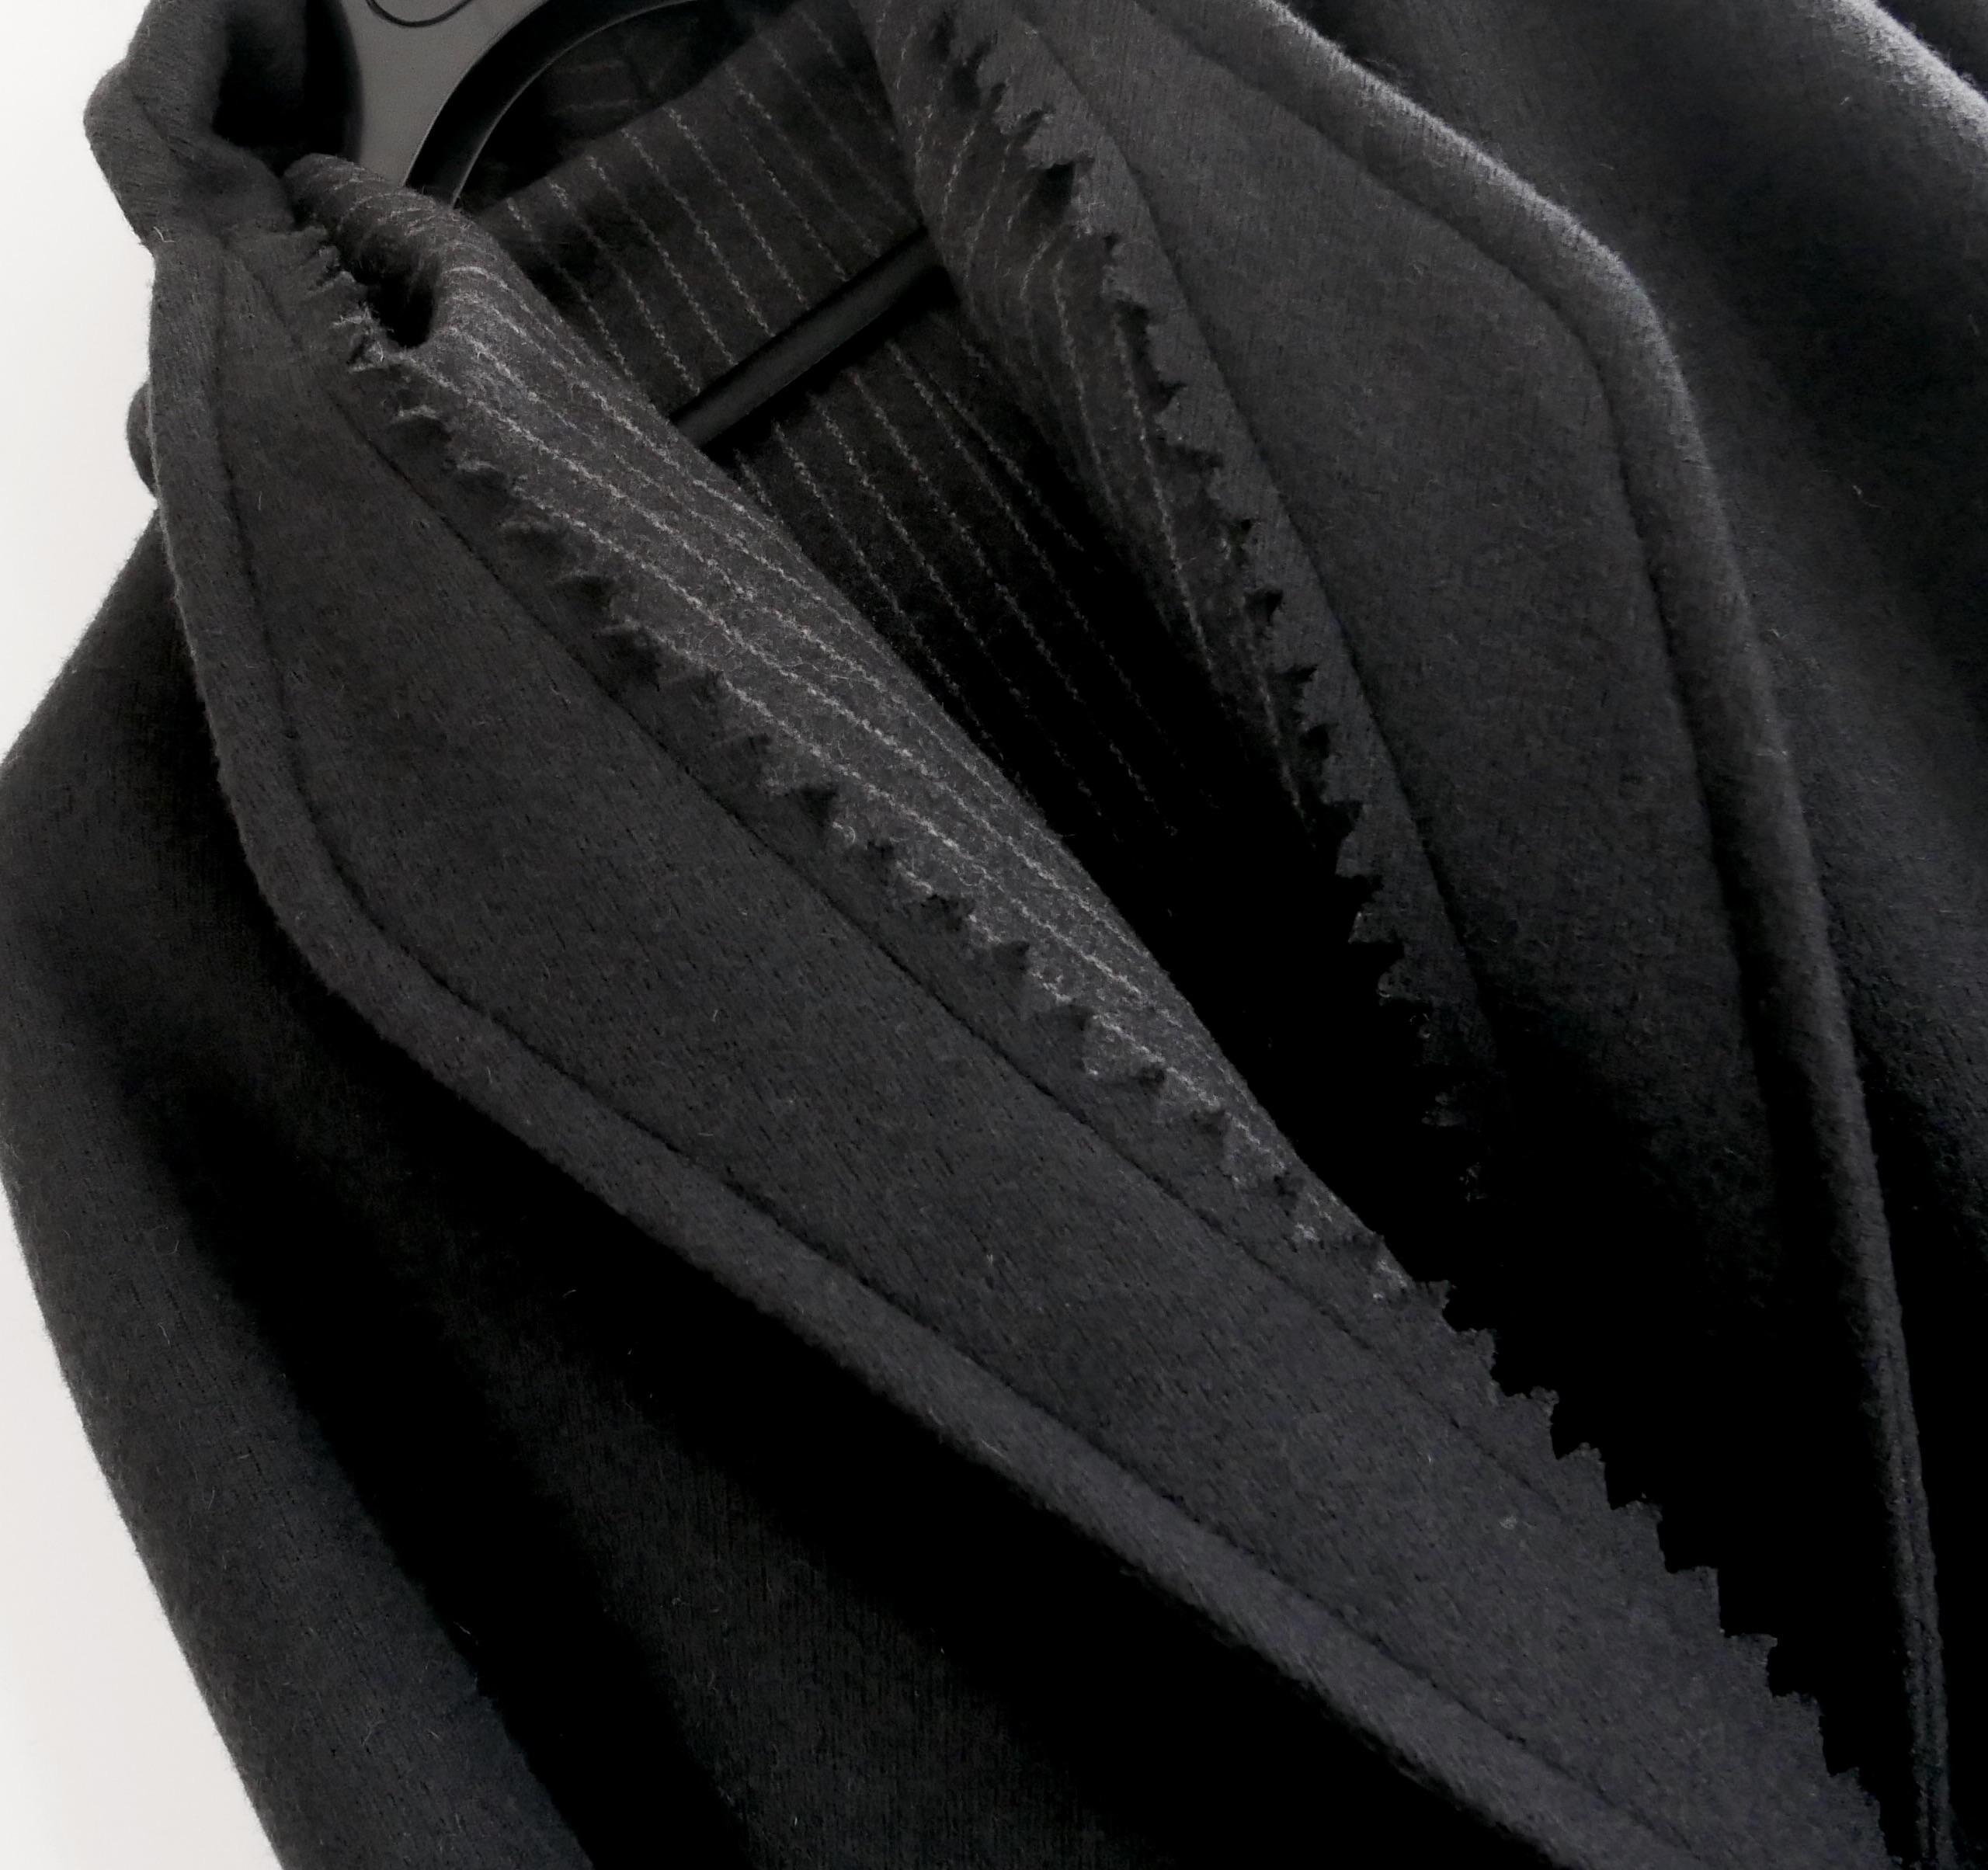 Super rare archival Dolce & Gabbana cape coat from the Fall 2012 menswear collection - look 6 on the runway. bought for £3250 and new with tags and spare button. Made from dense, thick charcoal black wool mix with grey pinstripe wool mix inner. It